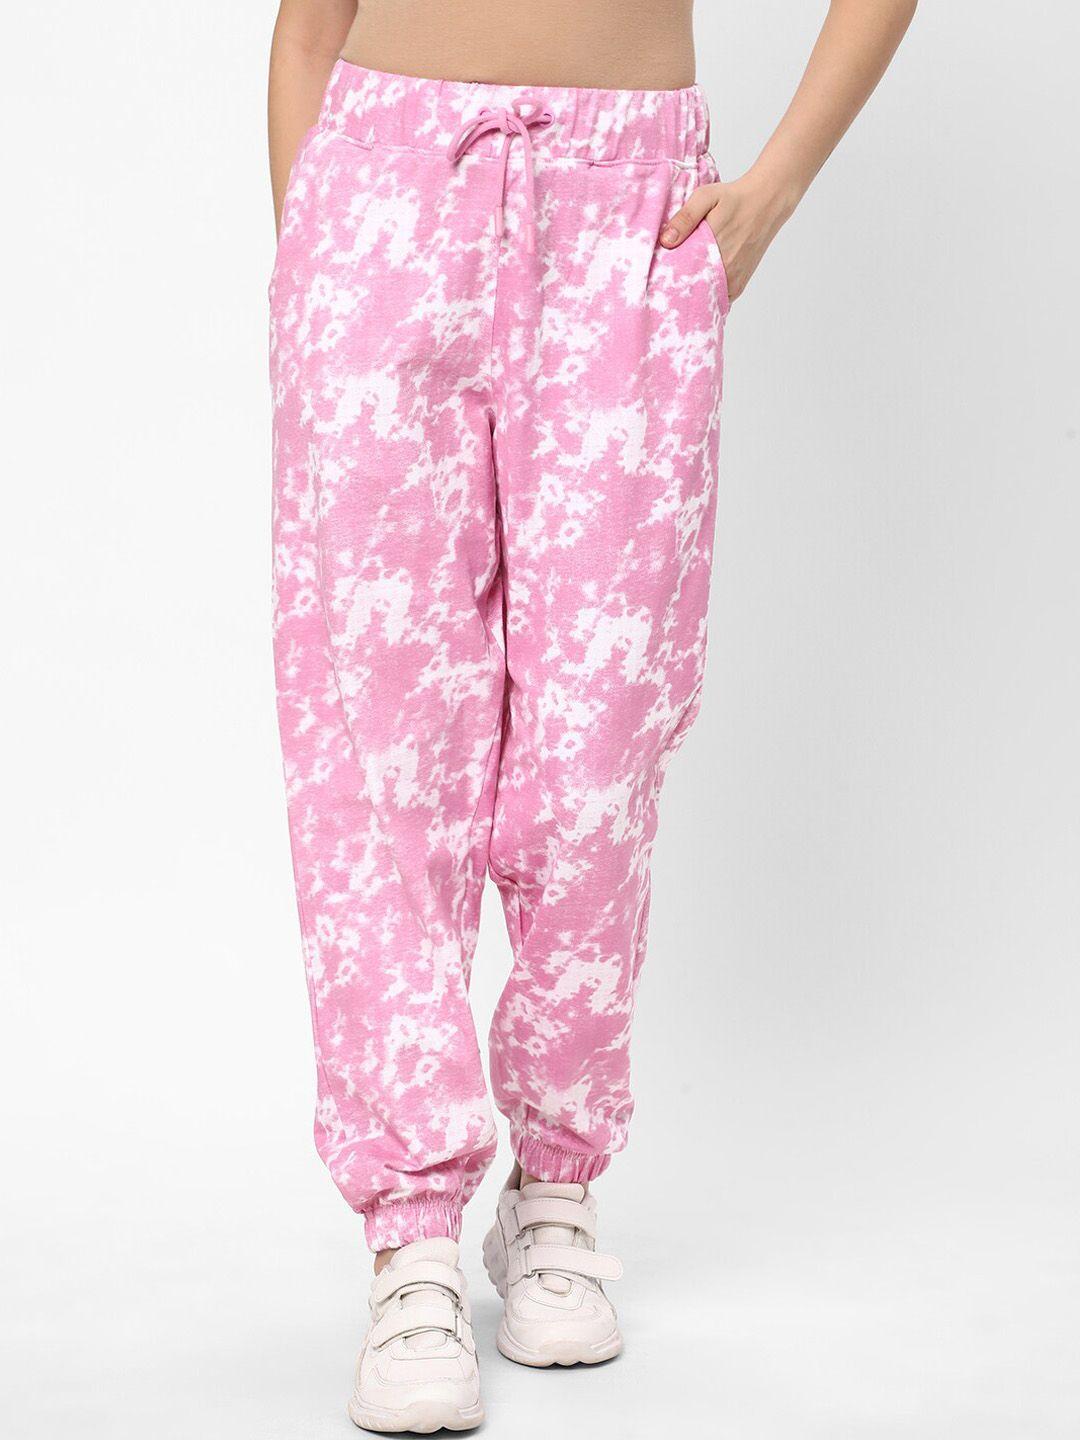 r&b-women-abstract-printed-cotton-mid-rise-joggers